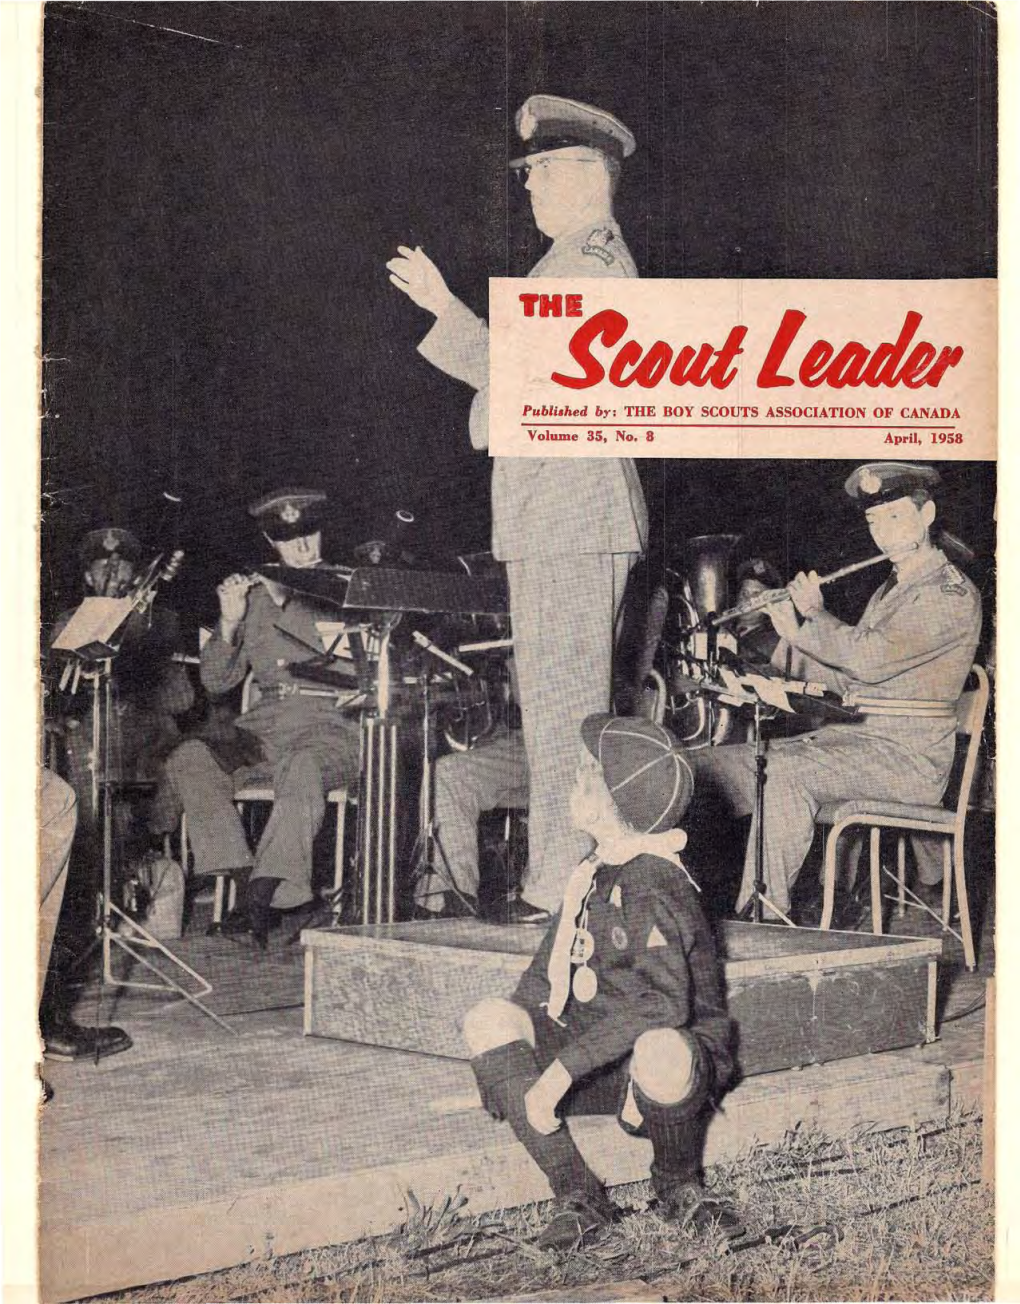 Publi.Hed By: the BOY SCOUTS ASSOCIATION of CANADA Volume 3$